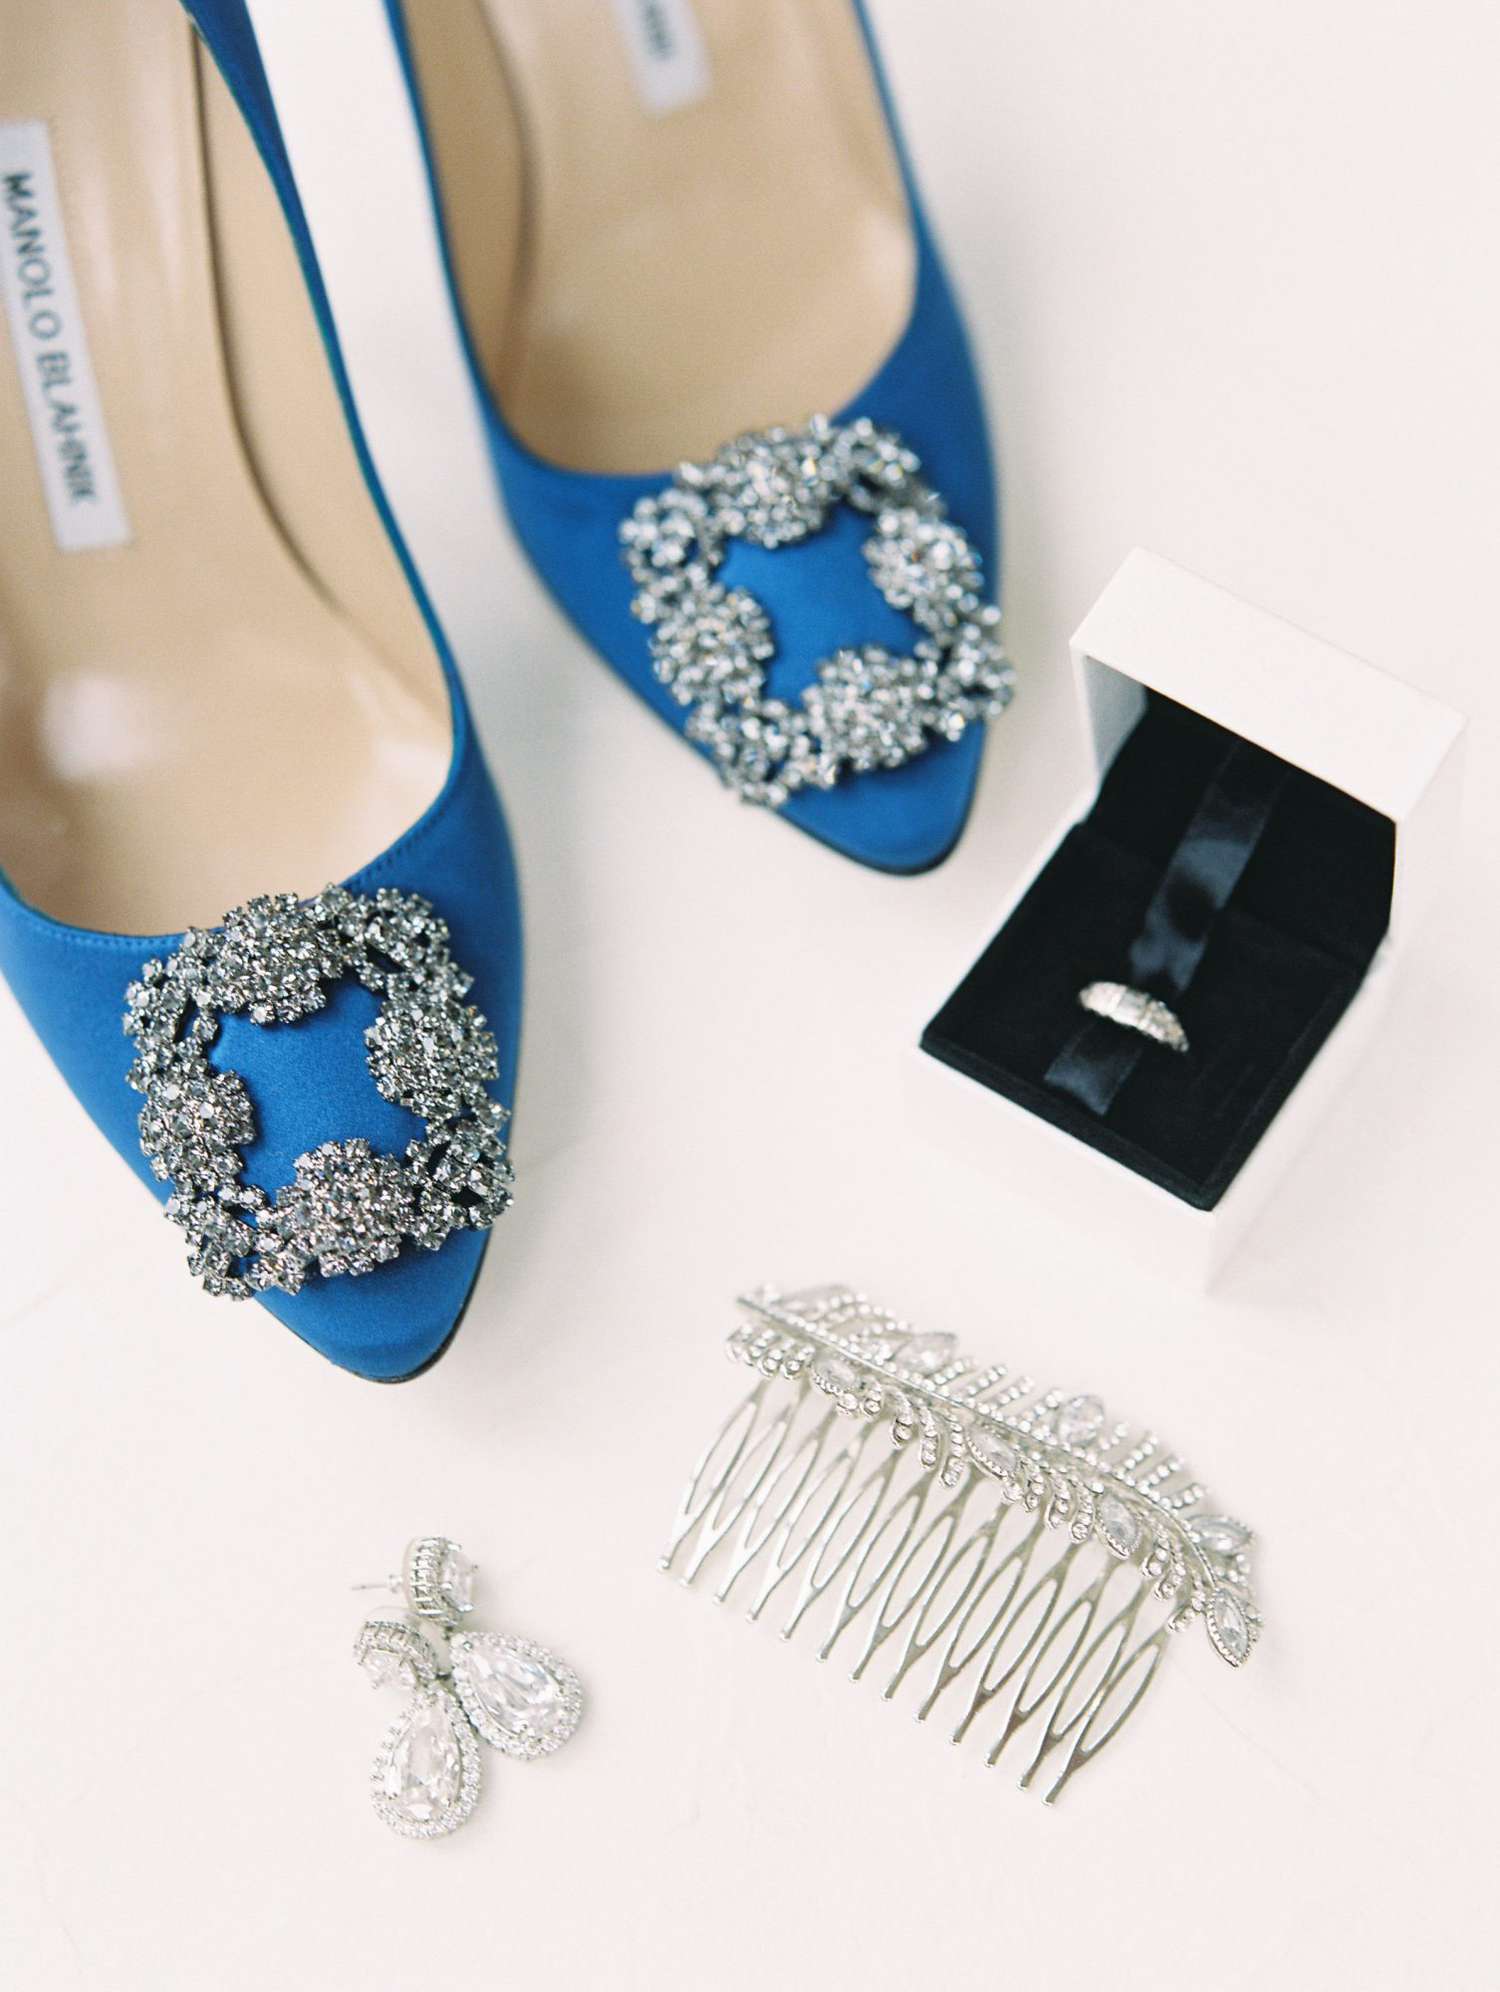 melissa justen wedding shoes and accessories